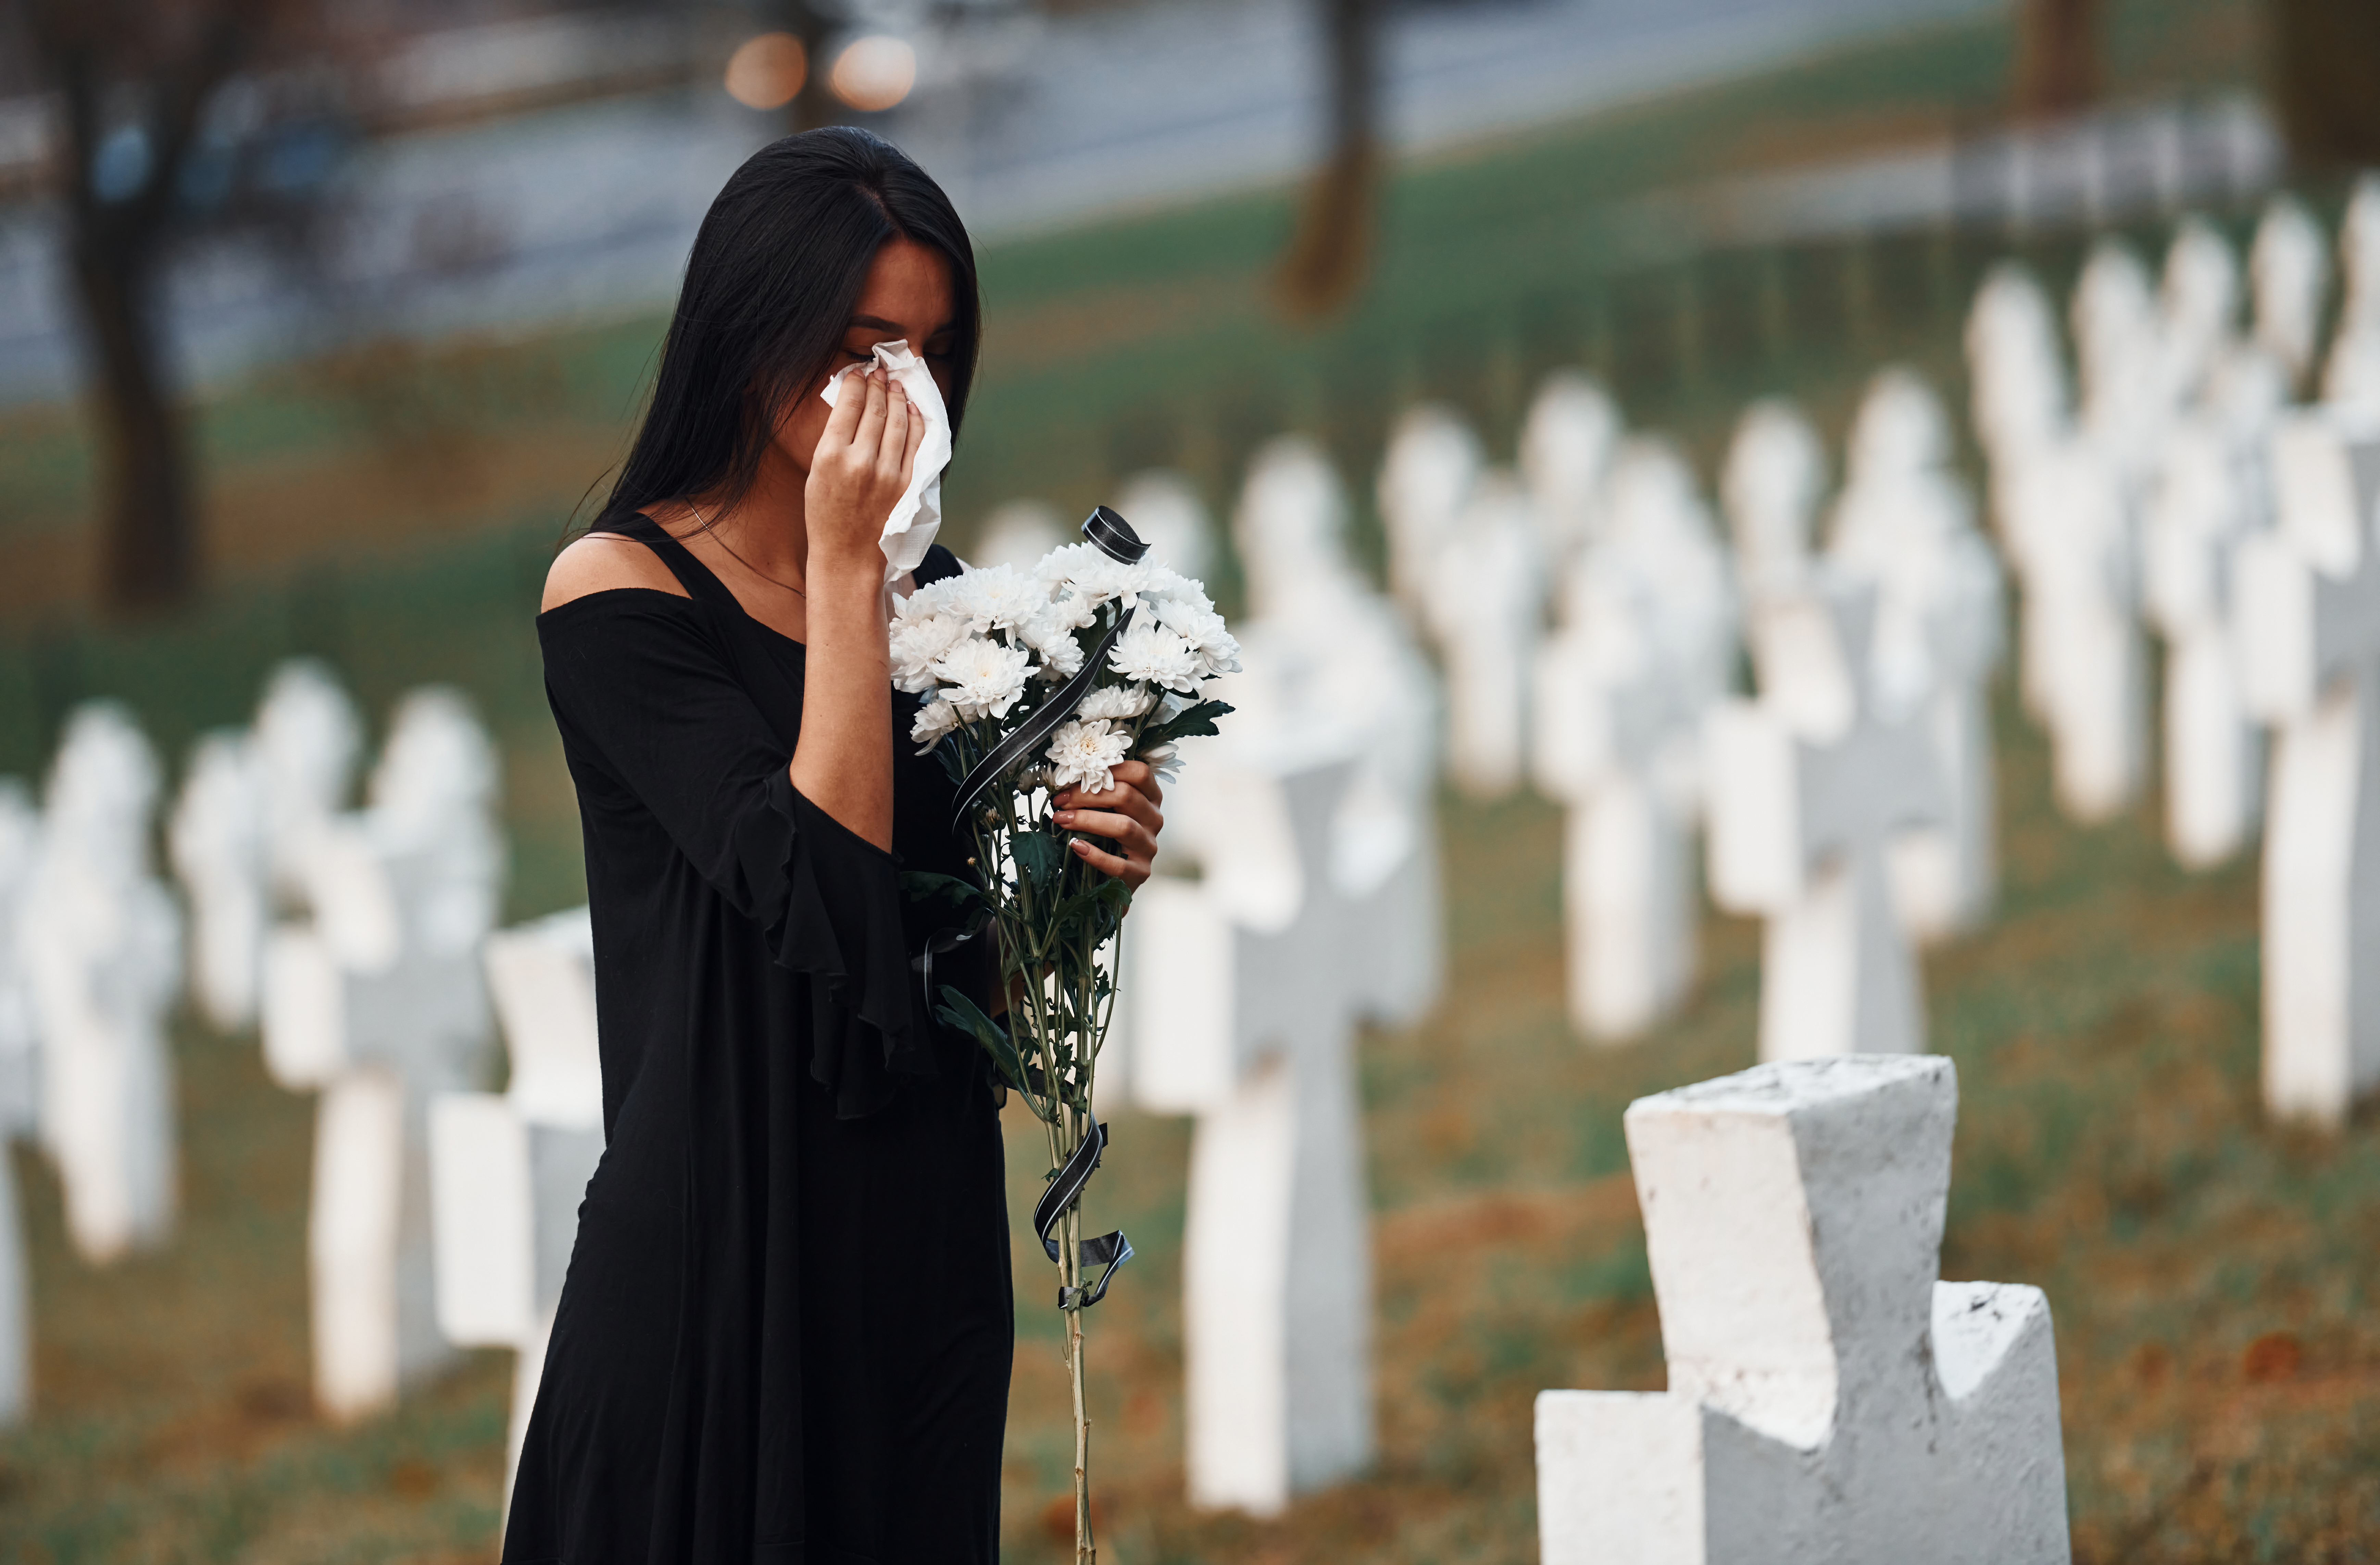 A young lady at the cemetery. | Source: Shutterstock